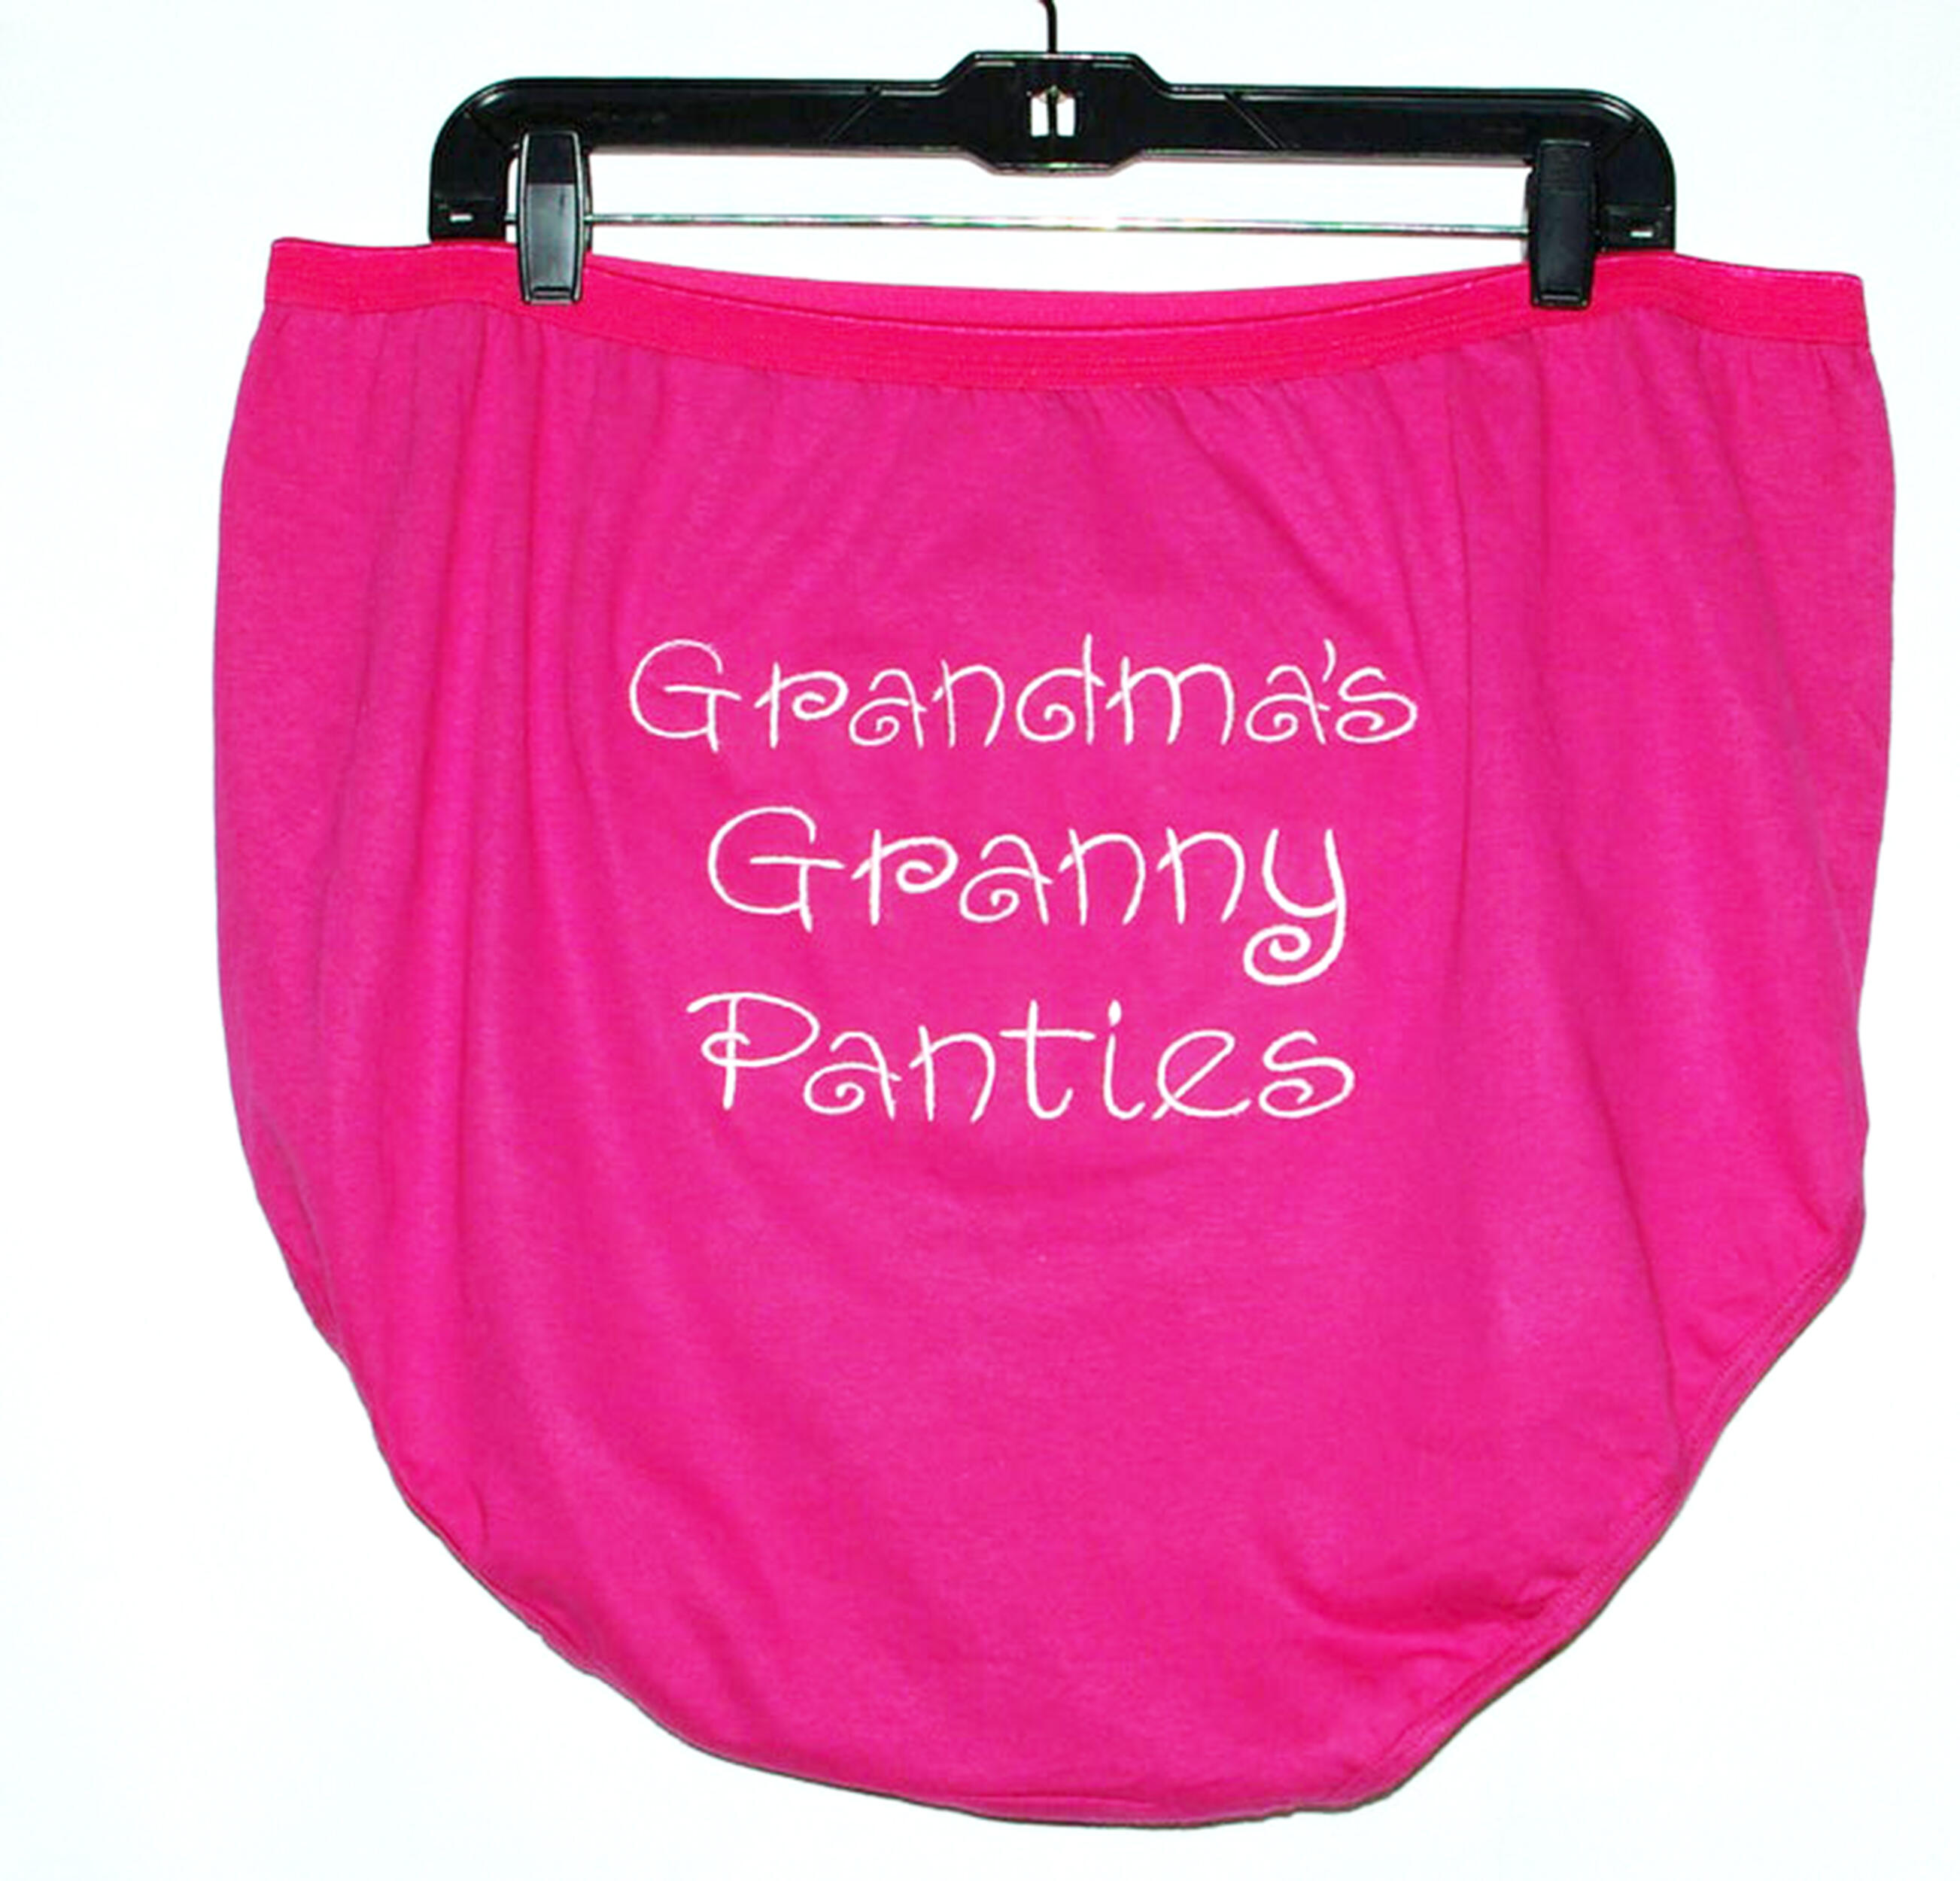 Granny Panties, Funny Custom Personalized Gag Gift Exchange, With